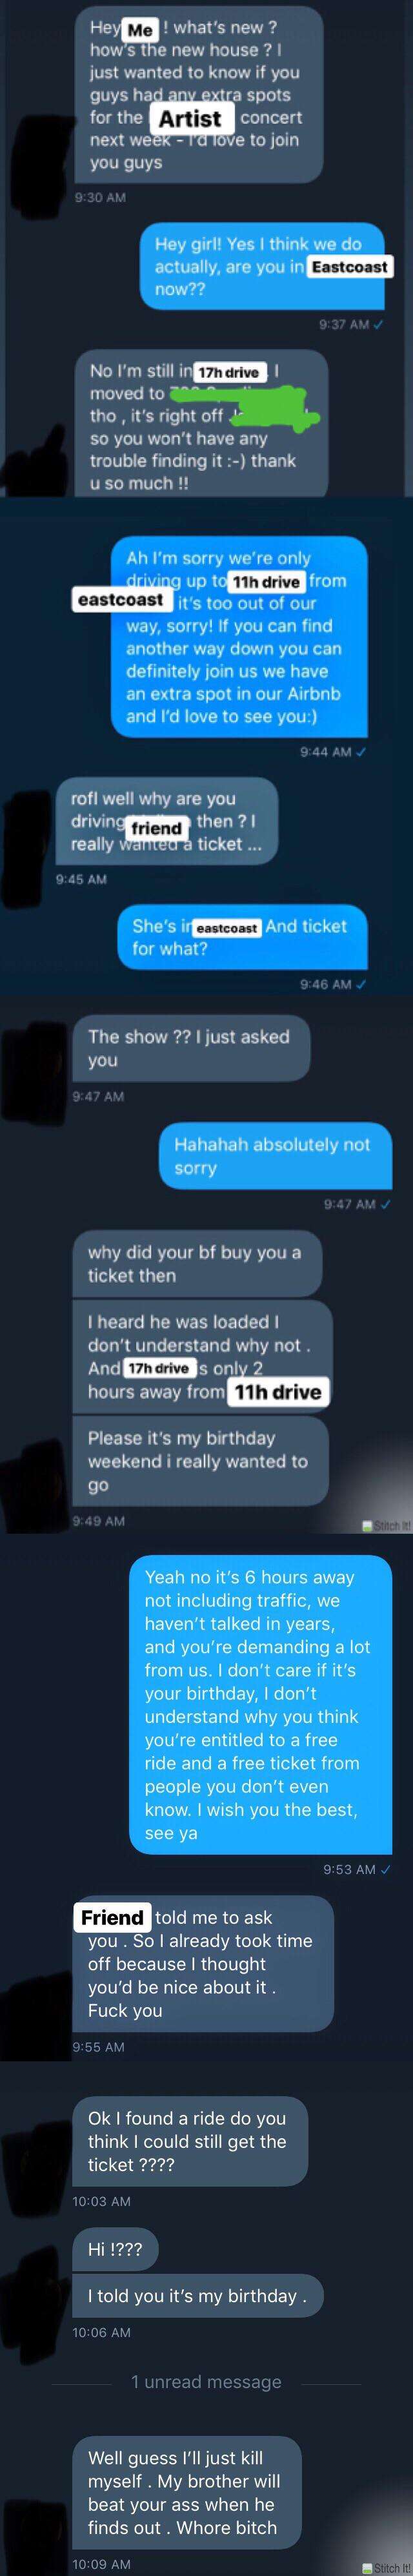 image showing She was a friend of a friend I had in university. Haven’t talked in years but wants me to drive 17hours to pick her up, then back 6hours for a concert that we’d buy her ticket to. I’m shocked to say the least, never thought i’d encounter someone like this.